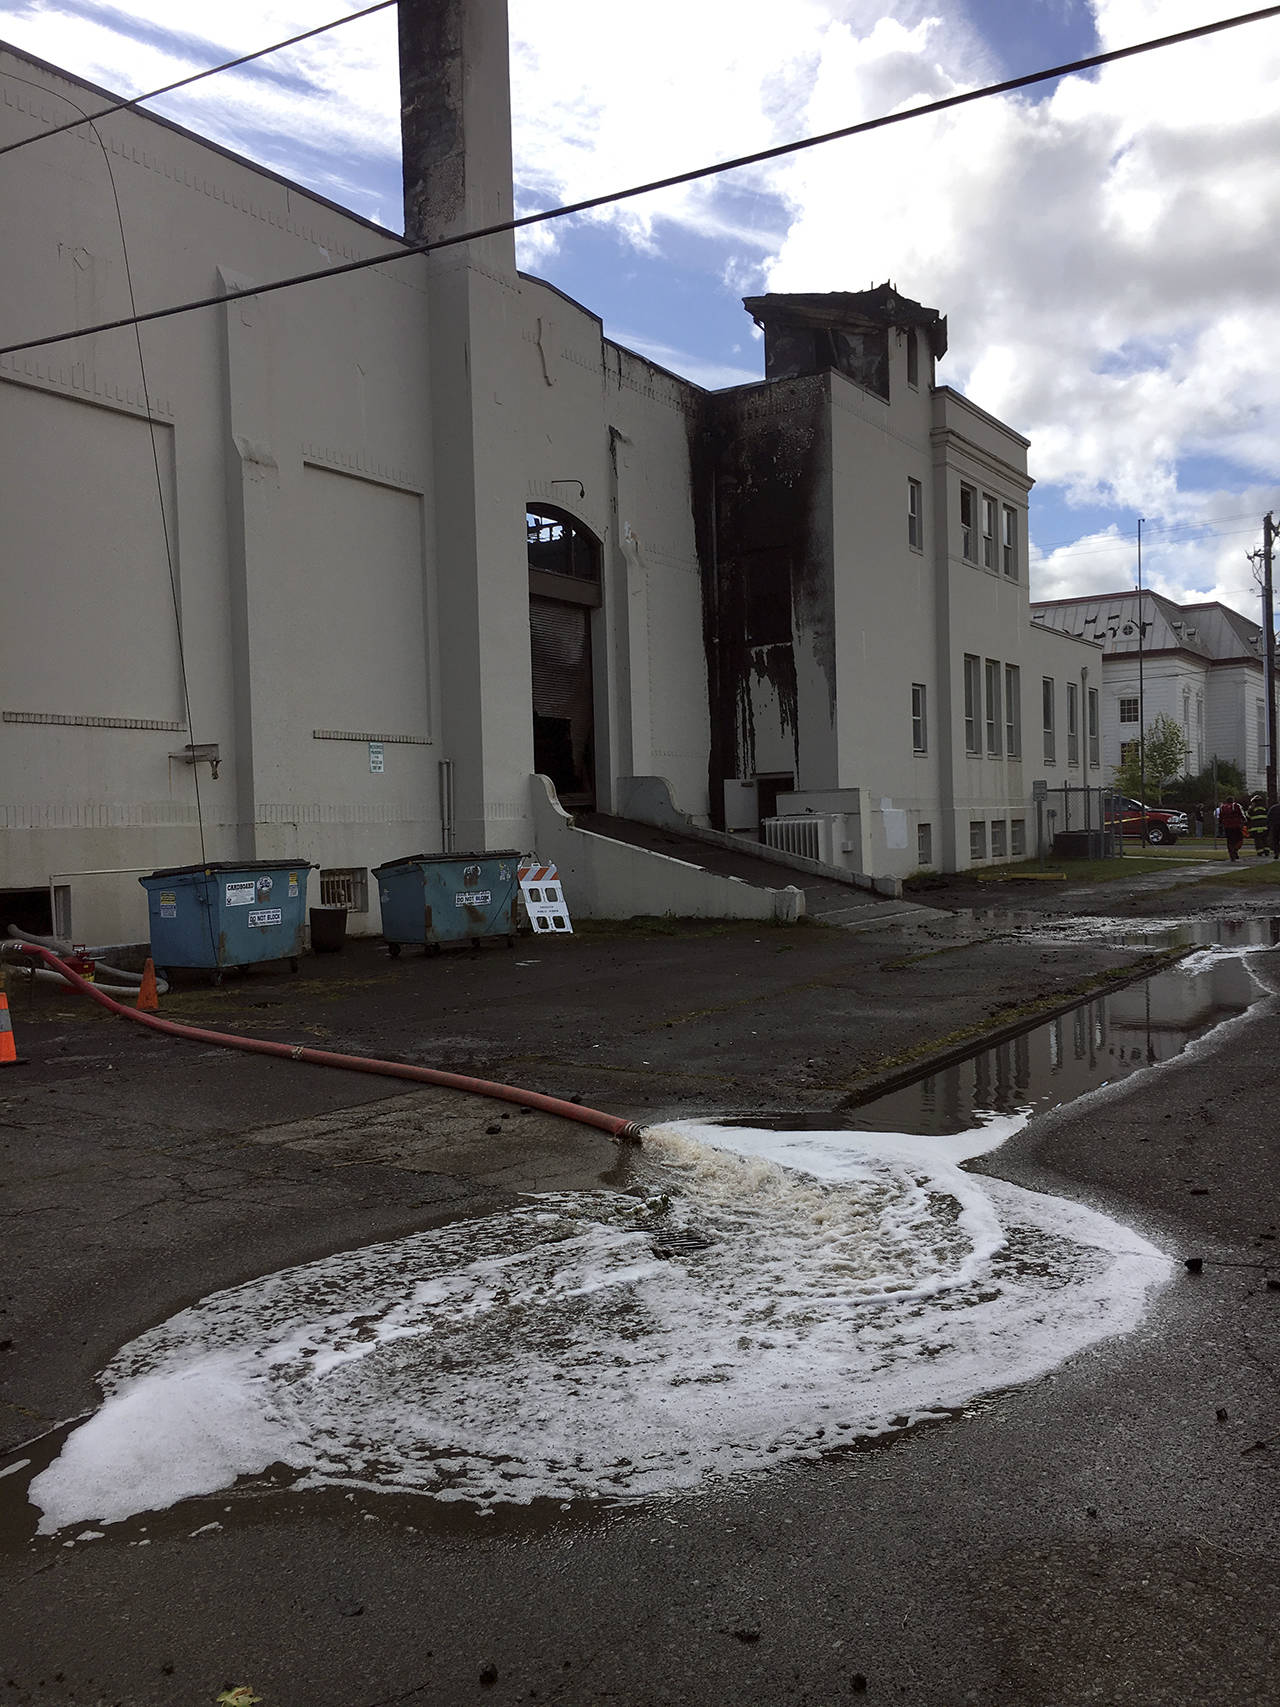 (Kat Bryant | The Daily World) Aberdeen Fire Department pumps water out of the Armory basement after the fire was put out.